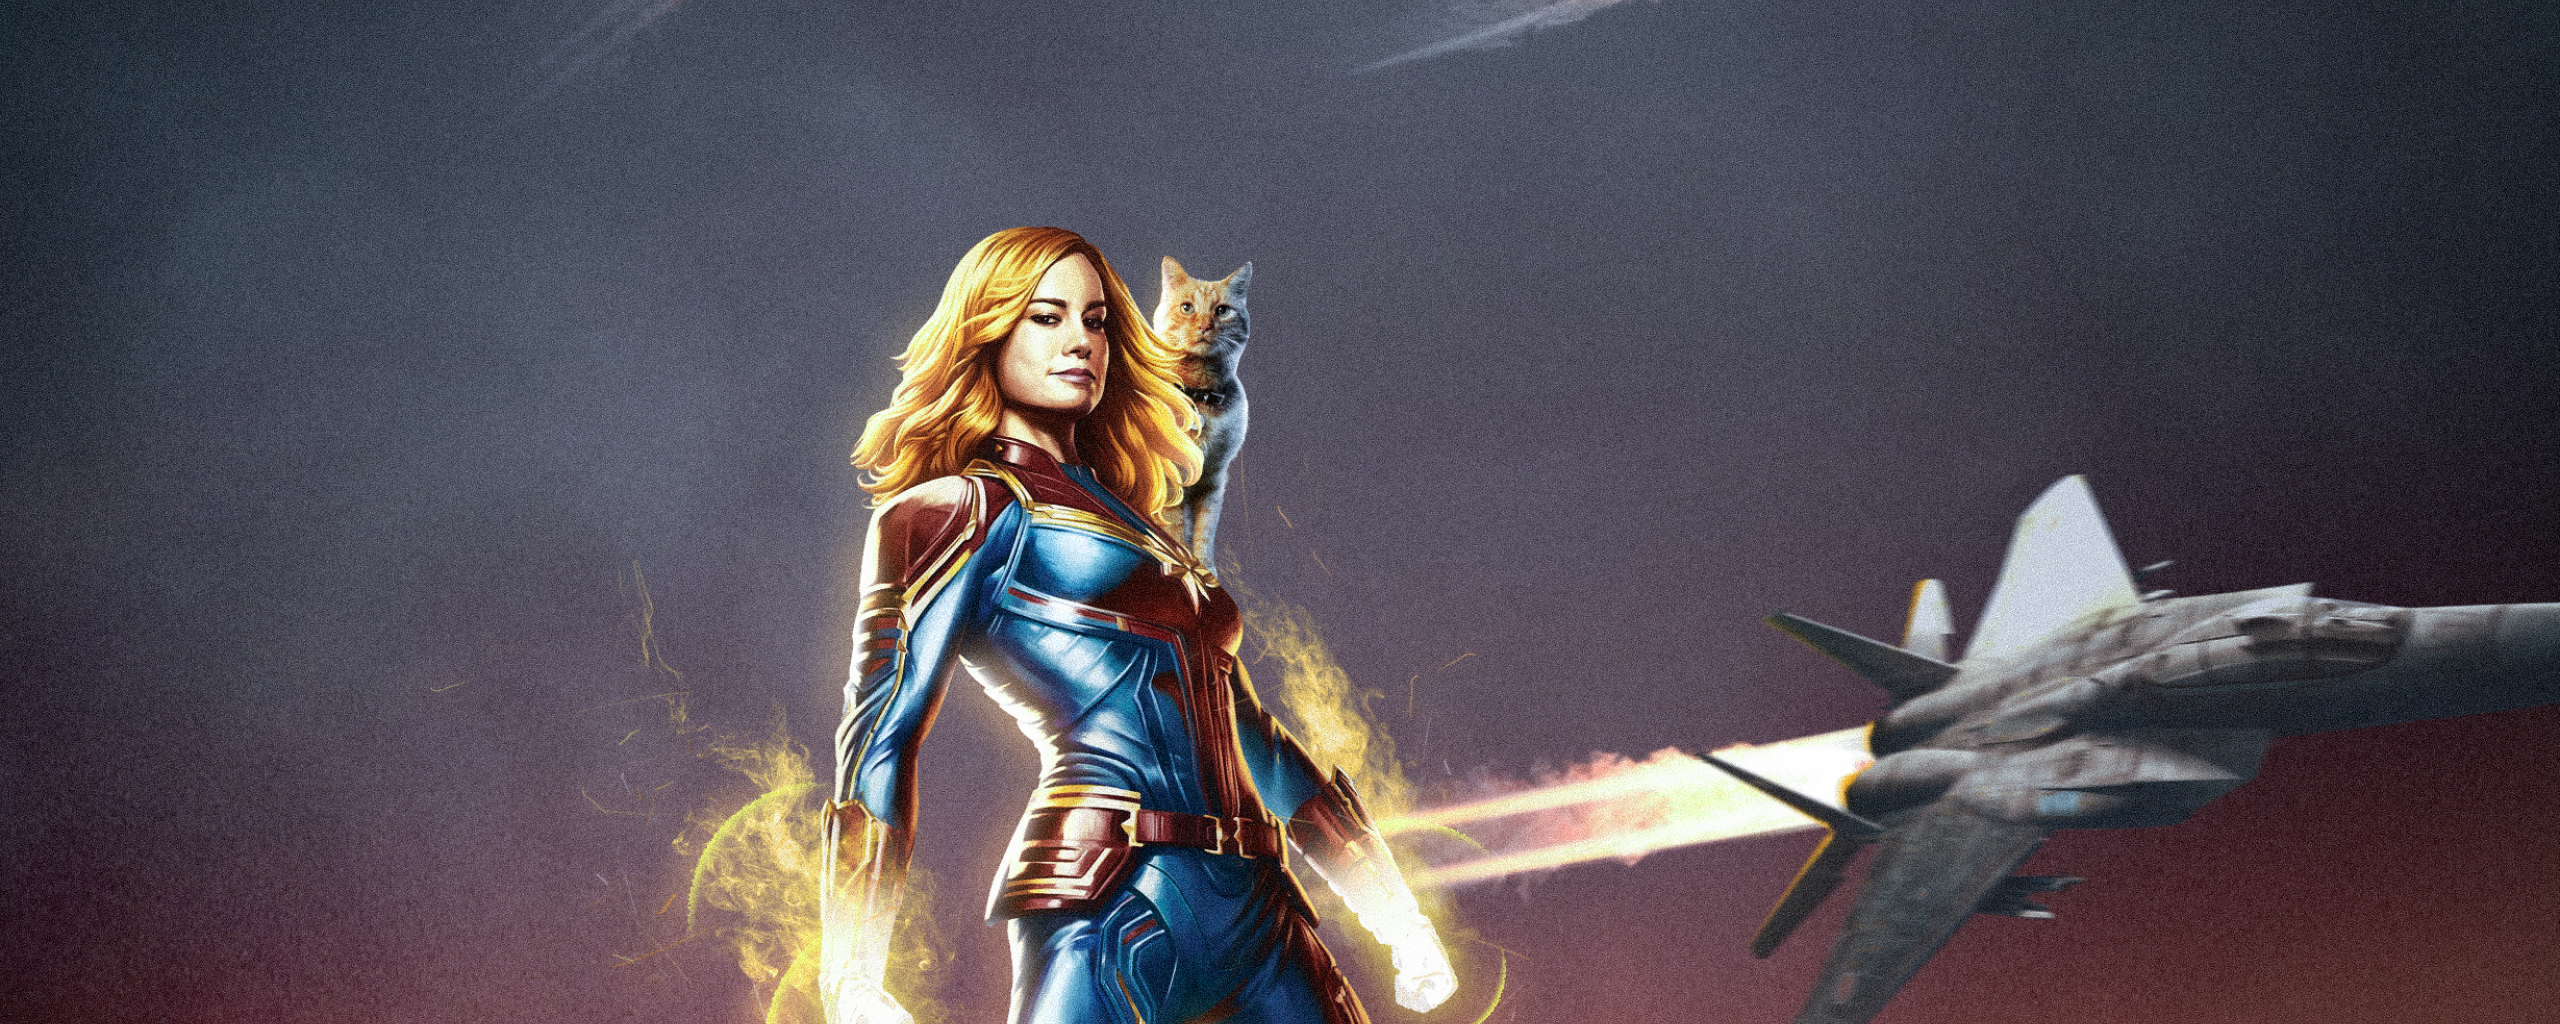 2560x1024 Captain Marvel Movie Poster Art 2560x1024 Resolution Images, Photos, Reviews